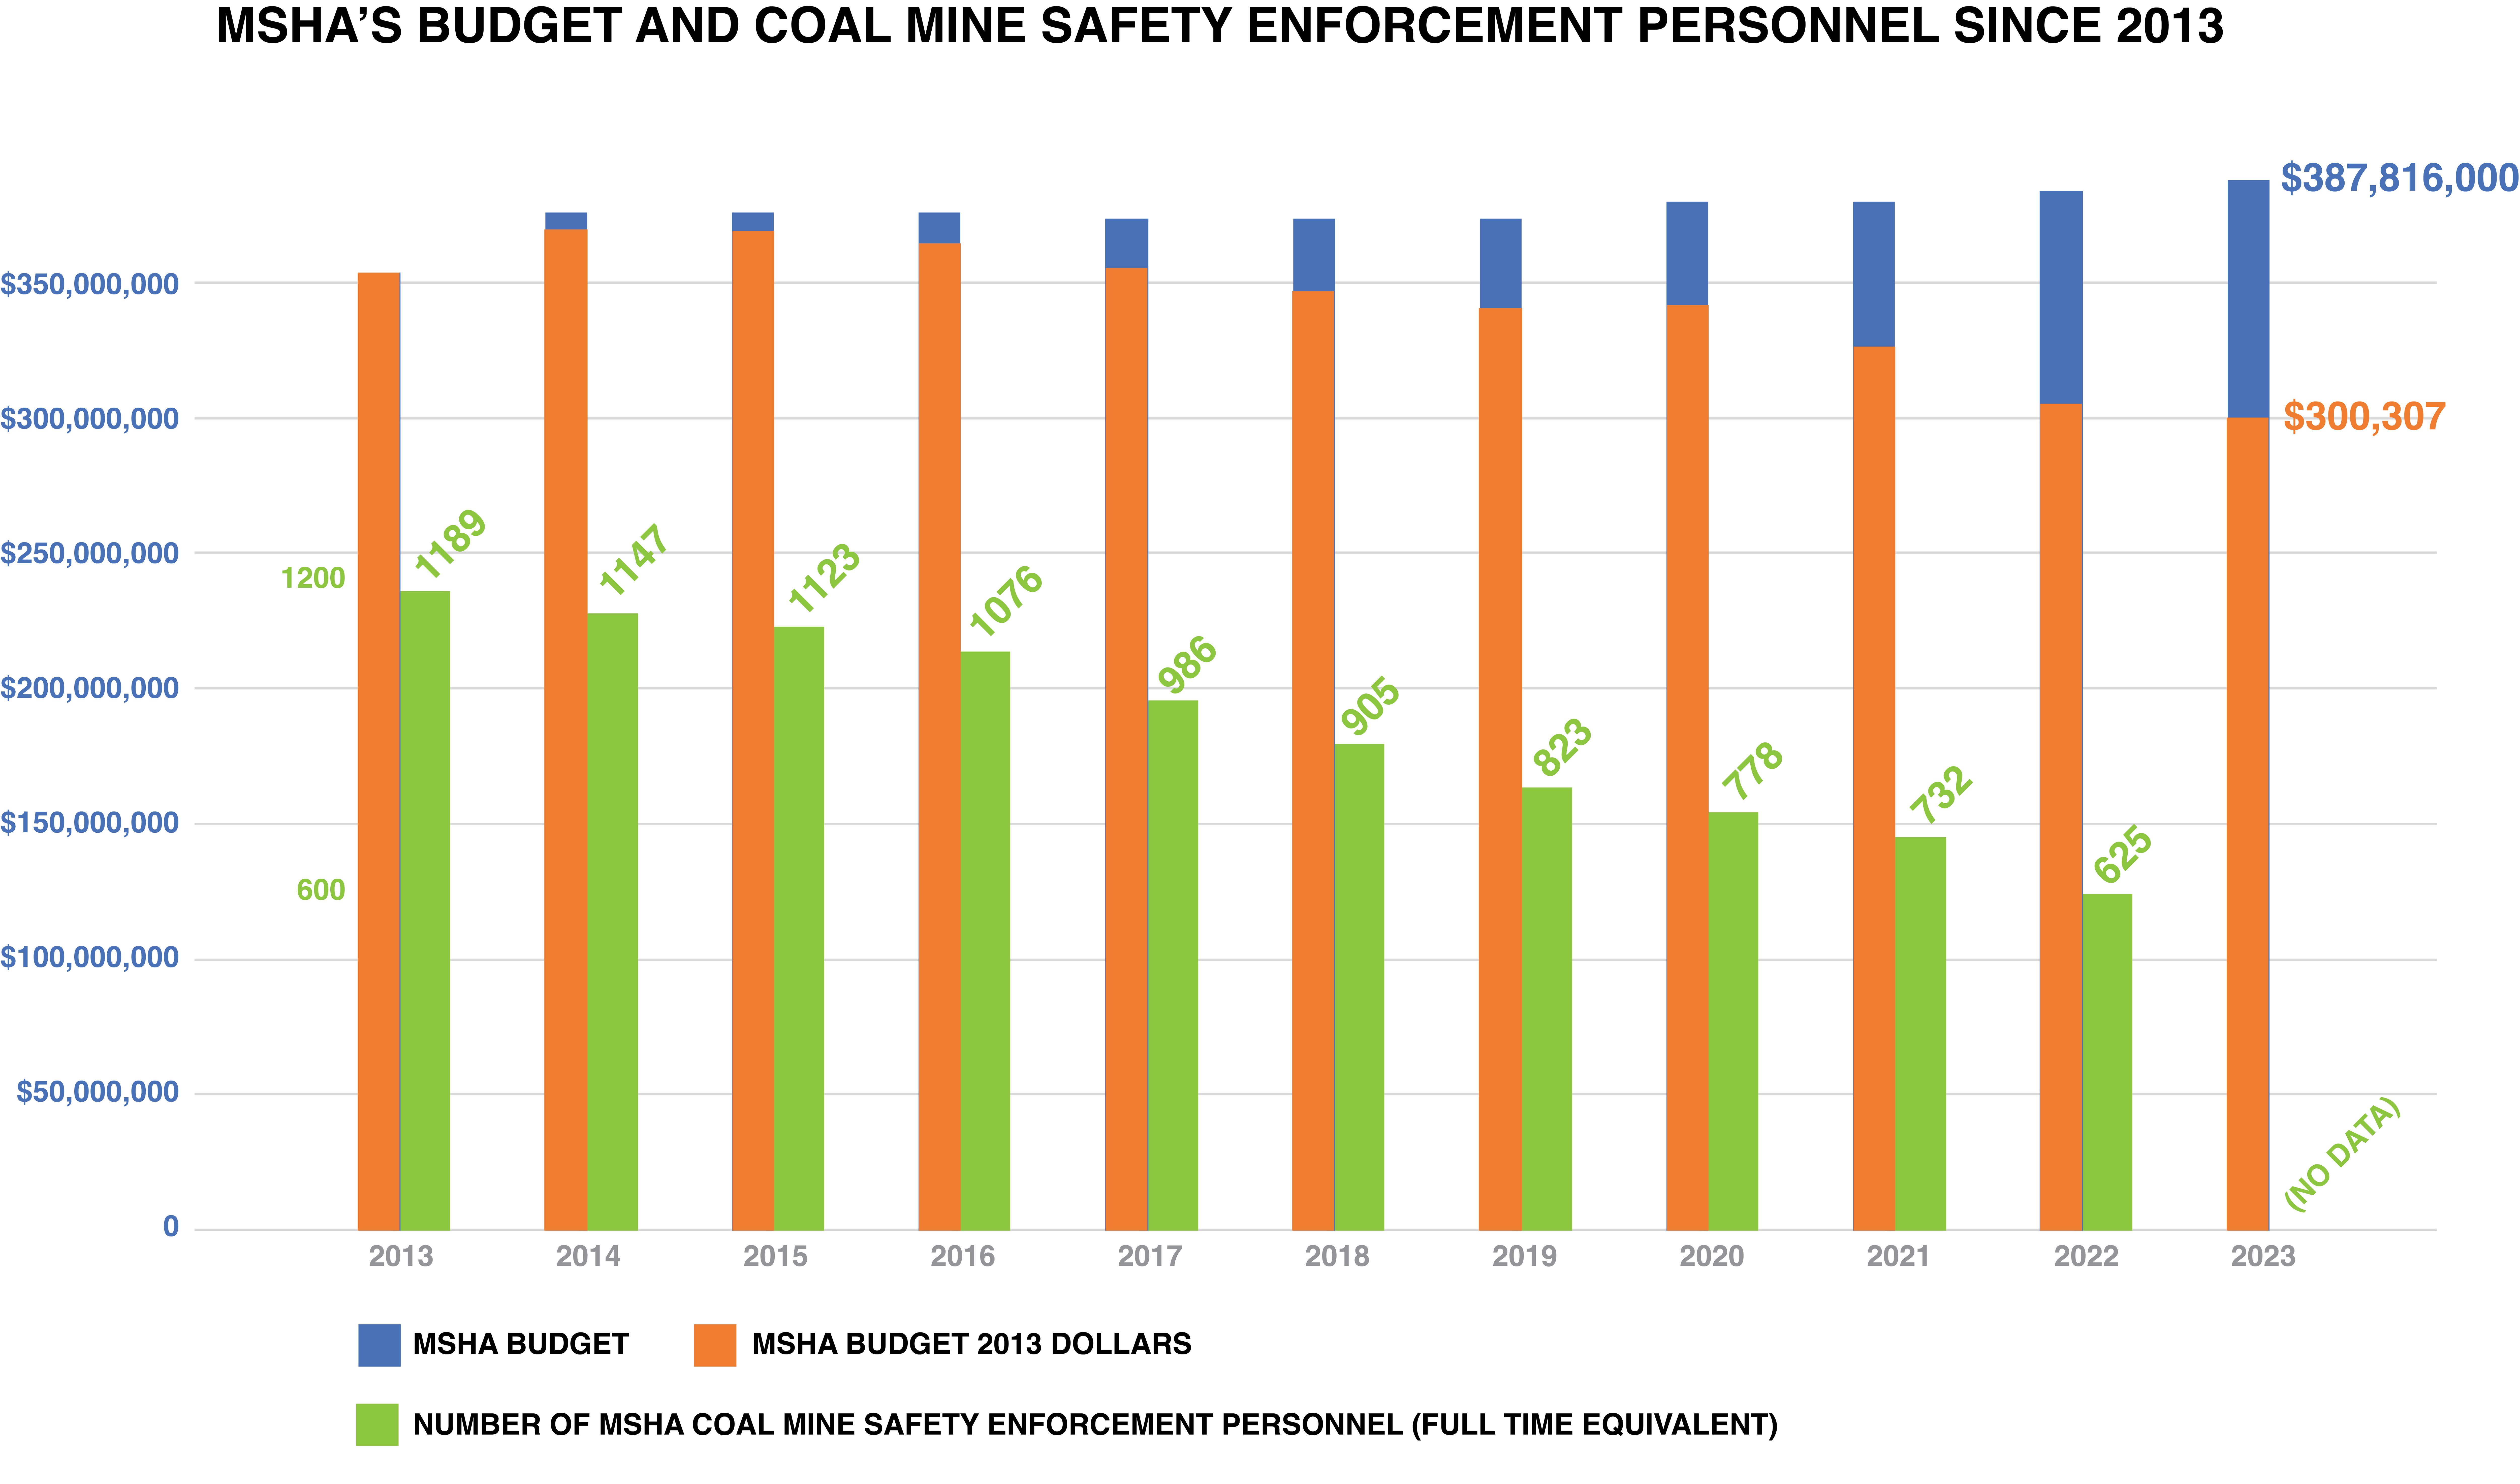 bar graph displaying MSHA's budget in real dollars and in 2013 dollars alongside coal enforcement staff numbers